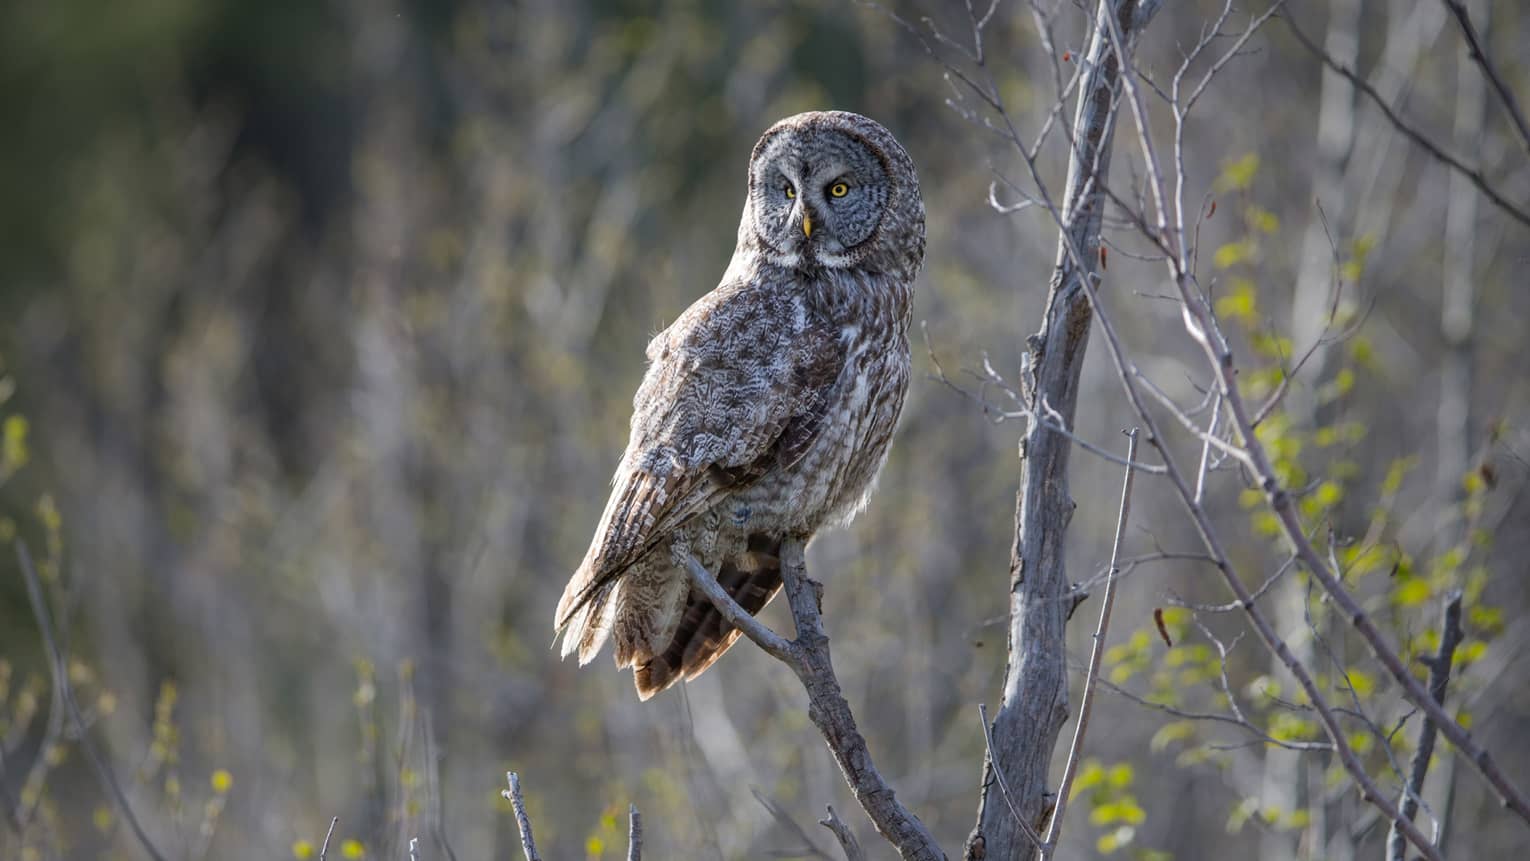 Large owl perched on branch in sunny forest